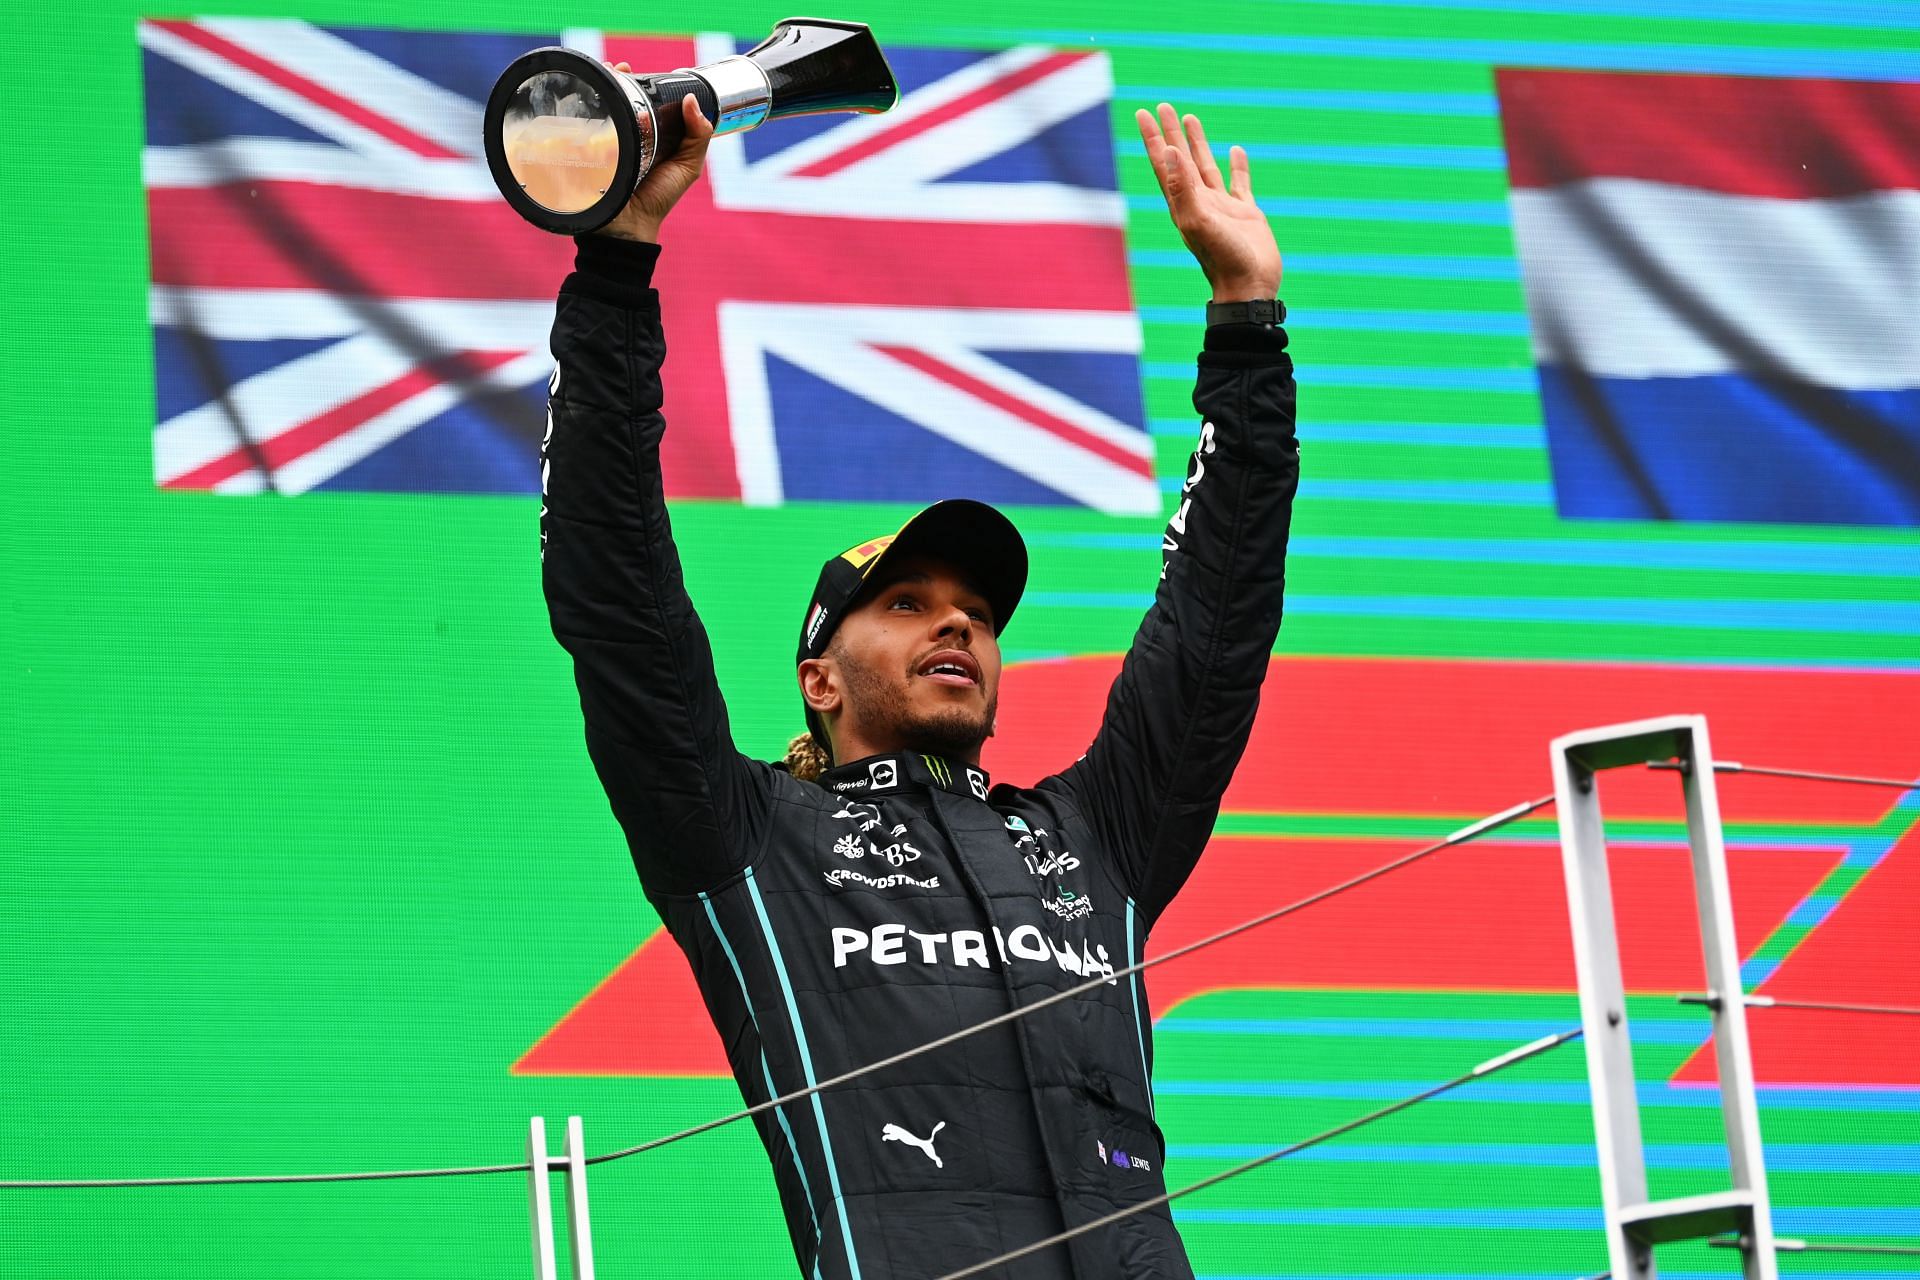 Mercedes driver Lewis Hamilton celebrates on the podium after his P2 finish at the 2022 F1 Hungarian GP. (Photo by Dan Mullan/Getty Images)